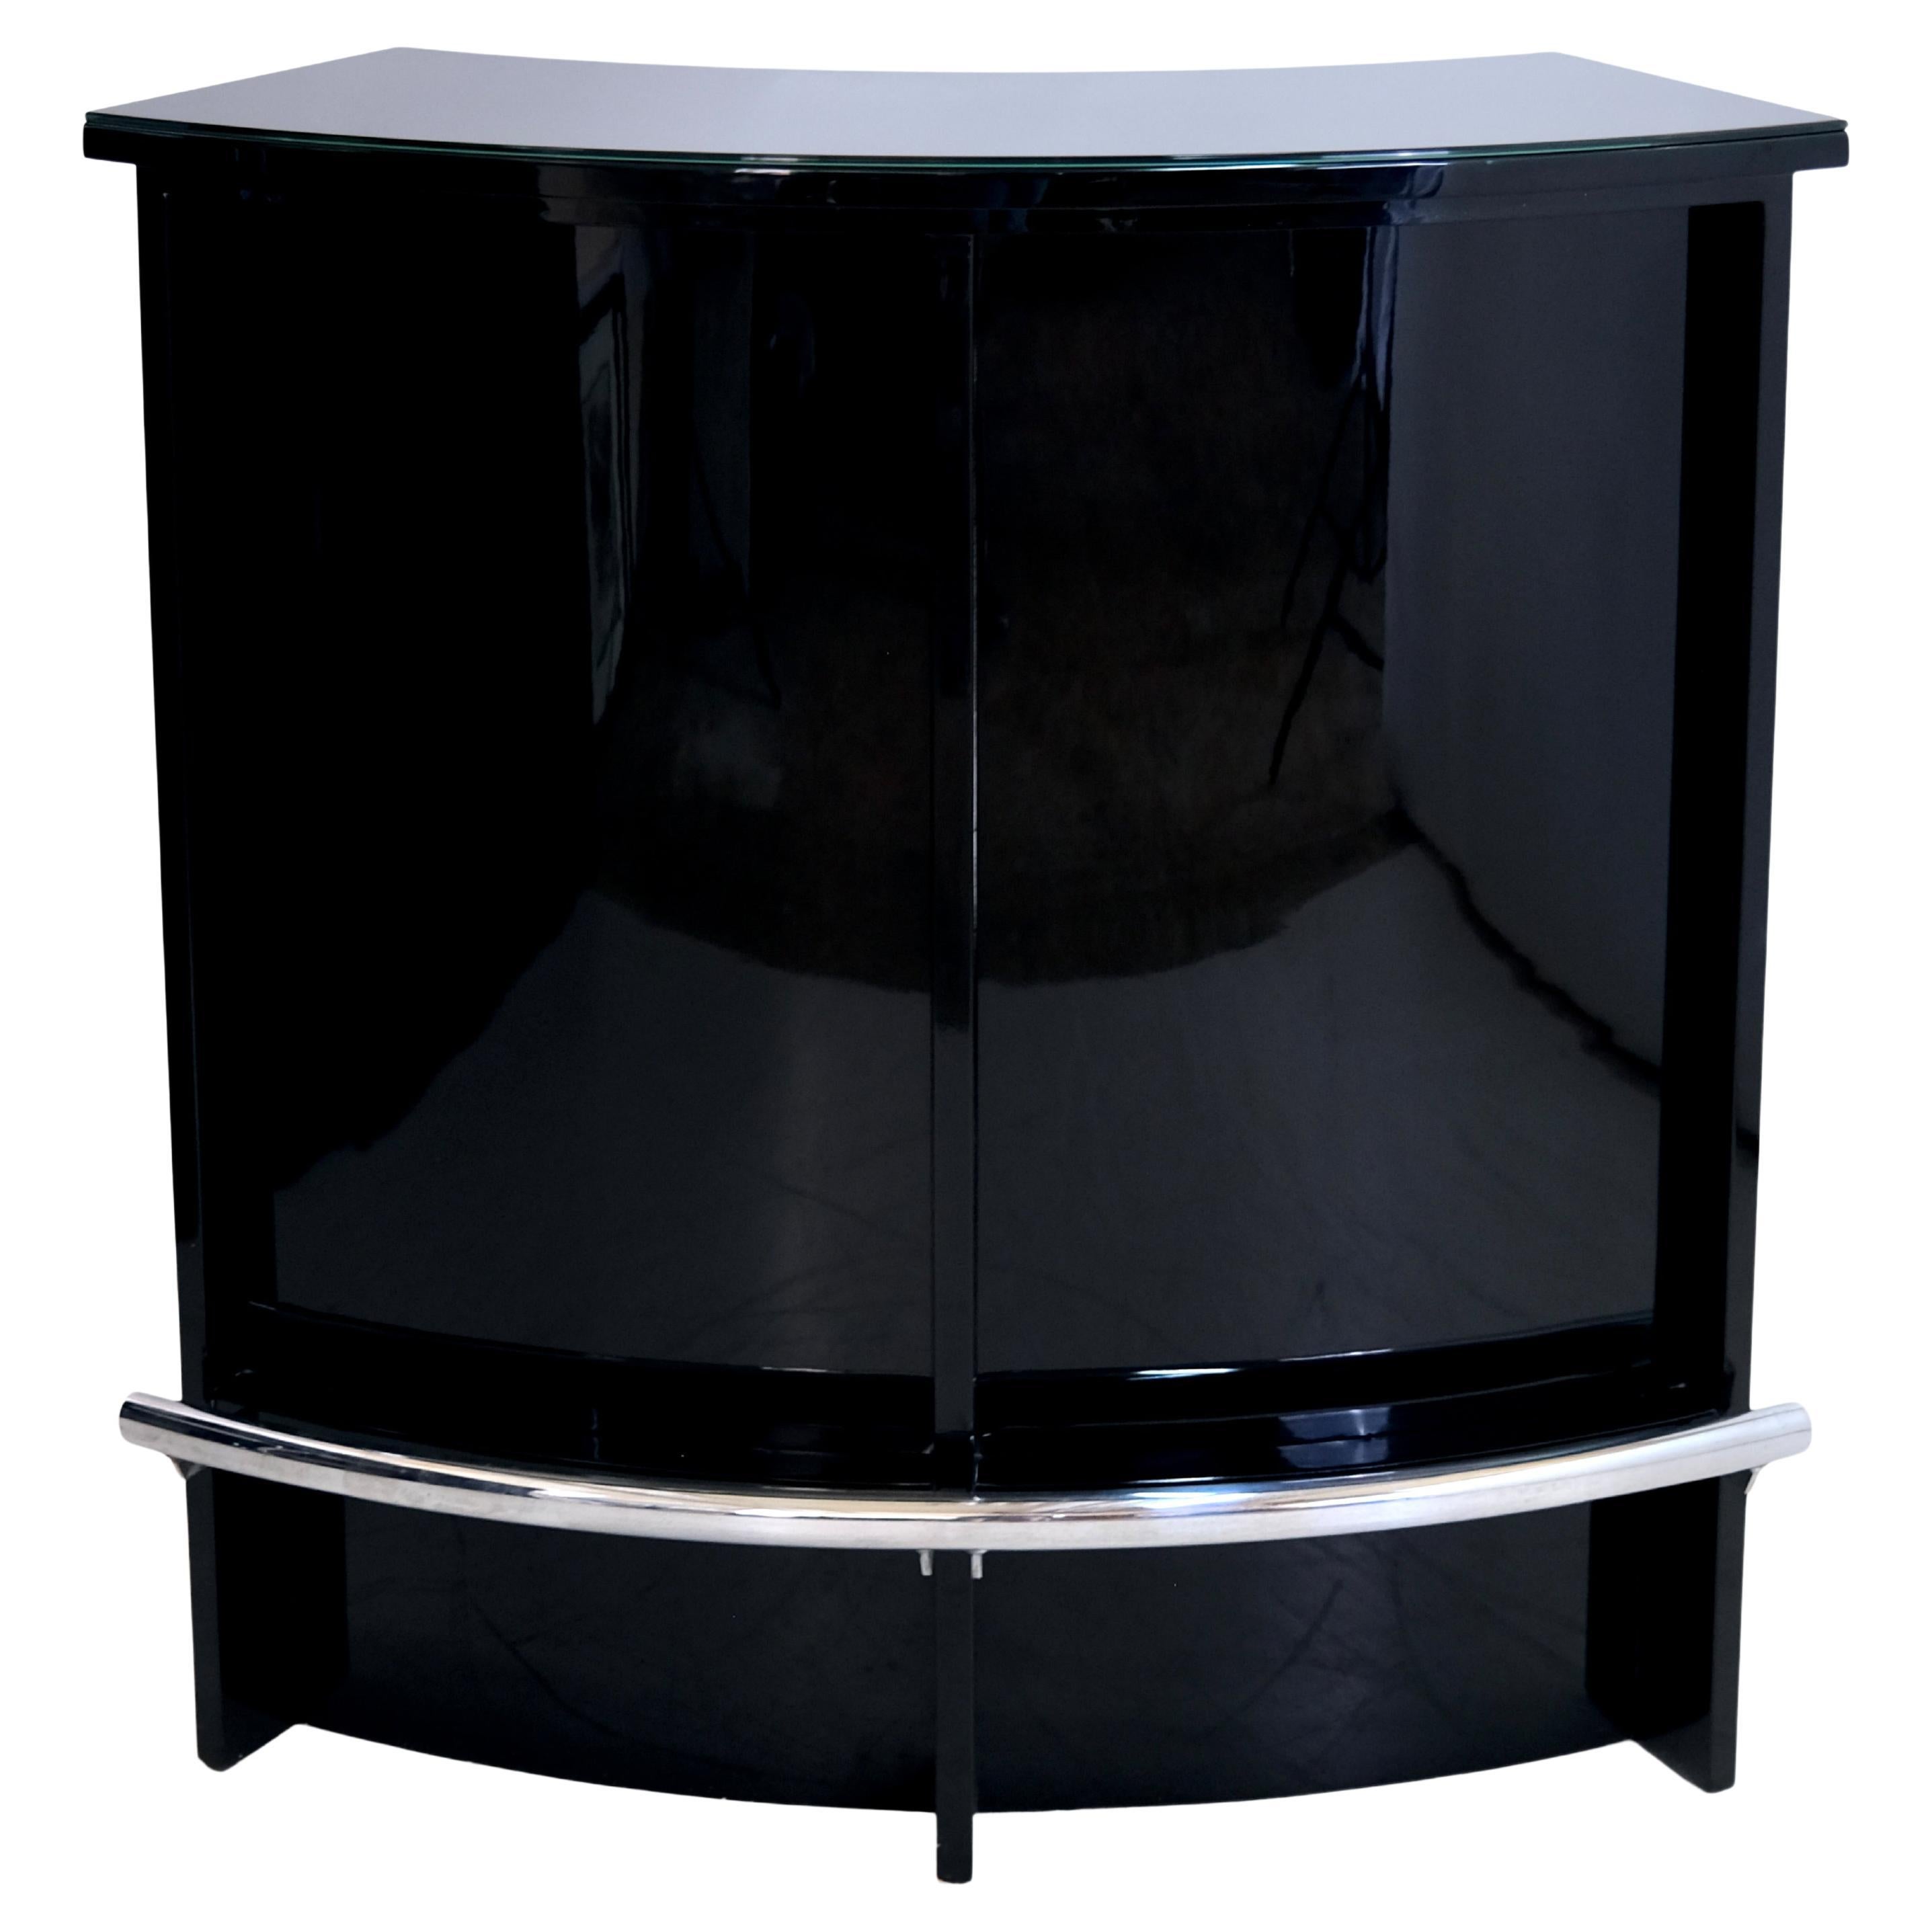 1930s Semicircular French Art Deco Bar Counter in Black Lacquer For Sale